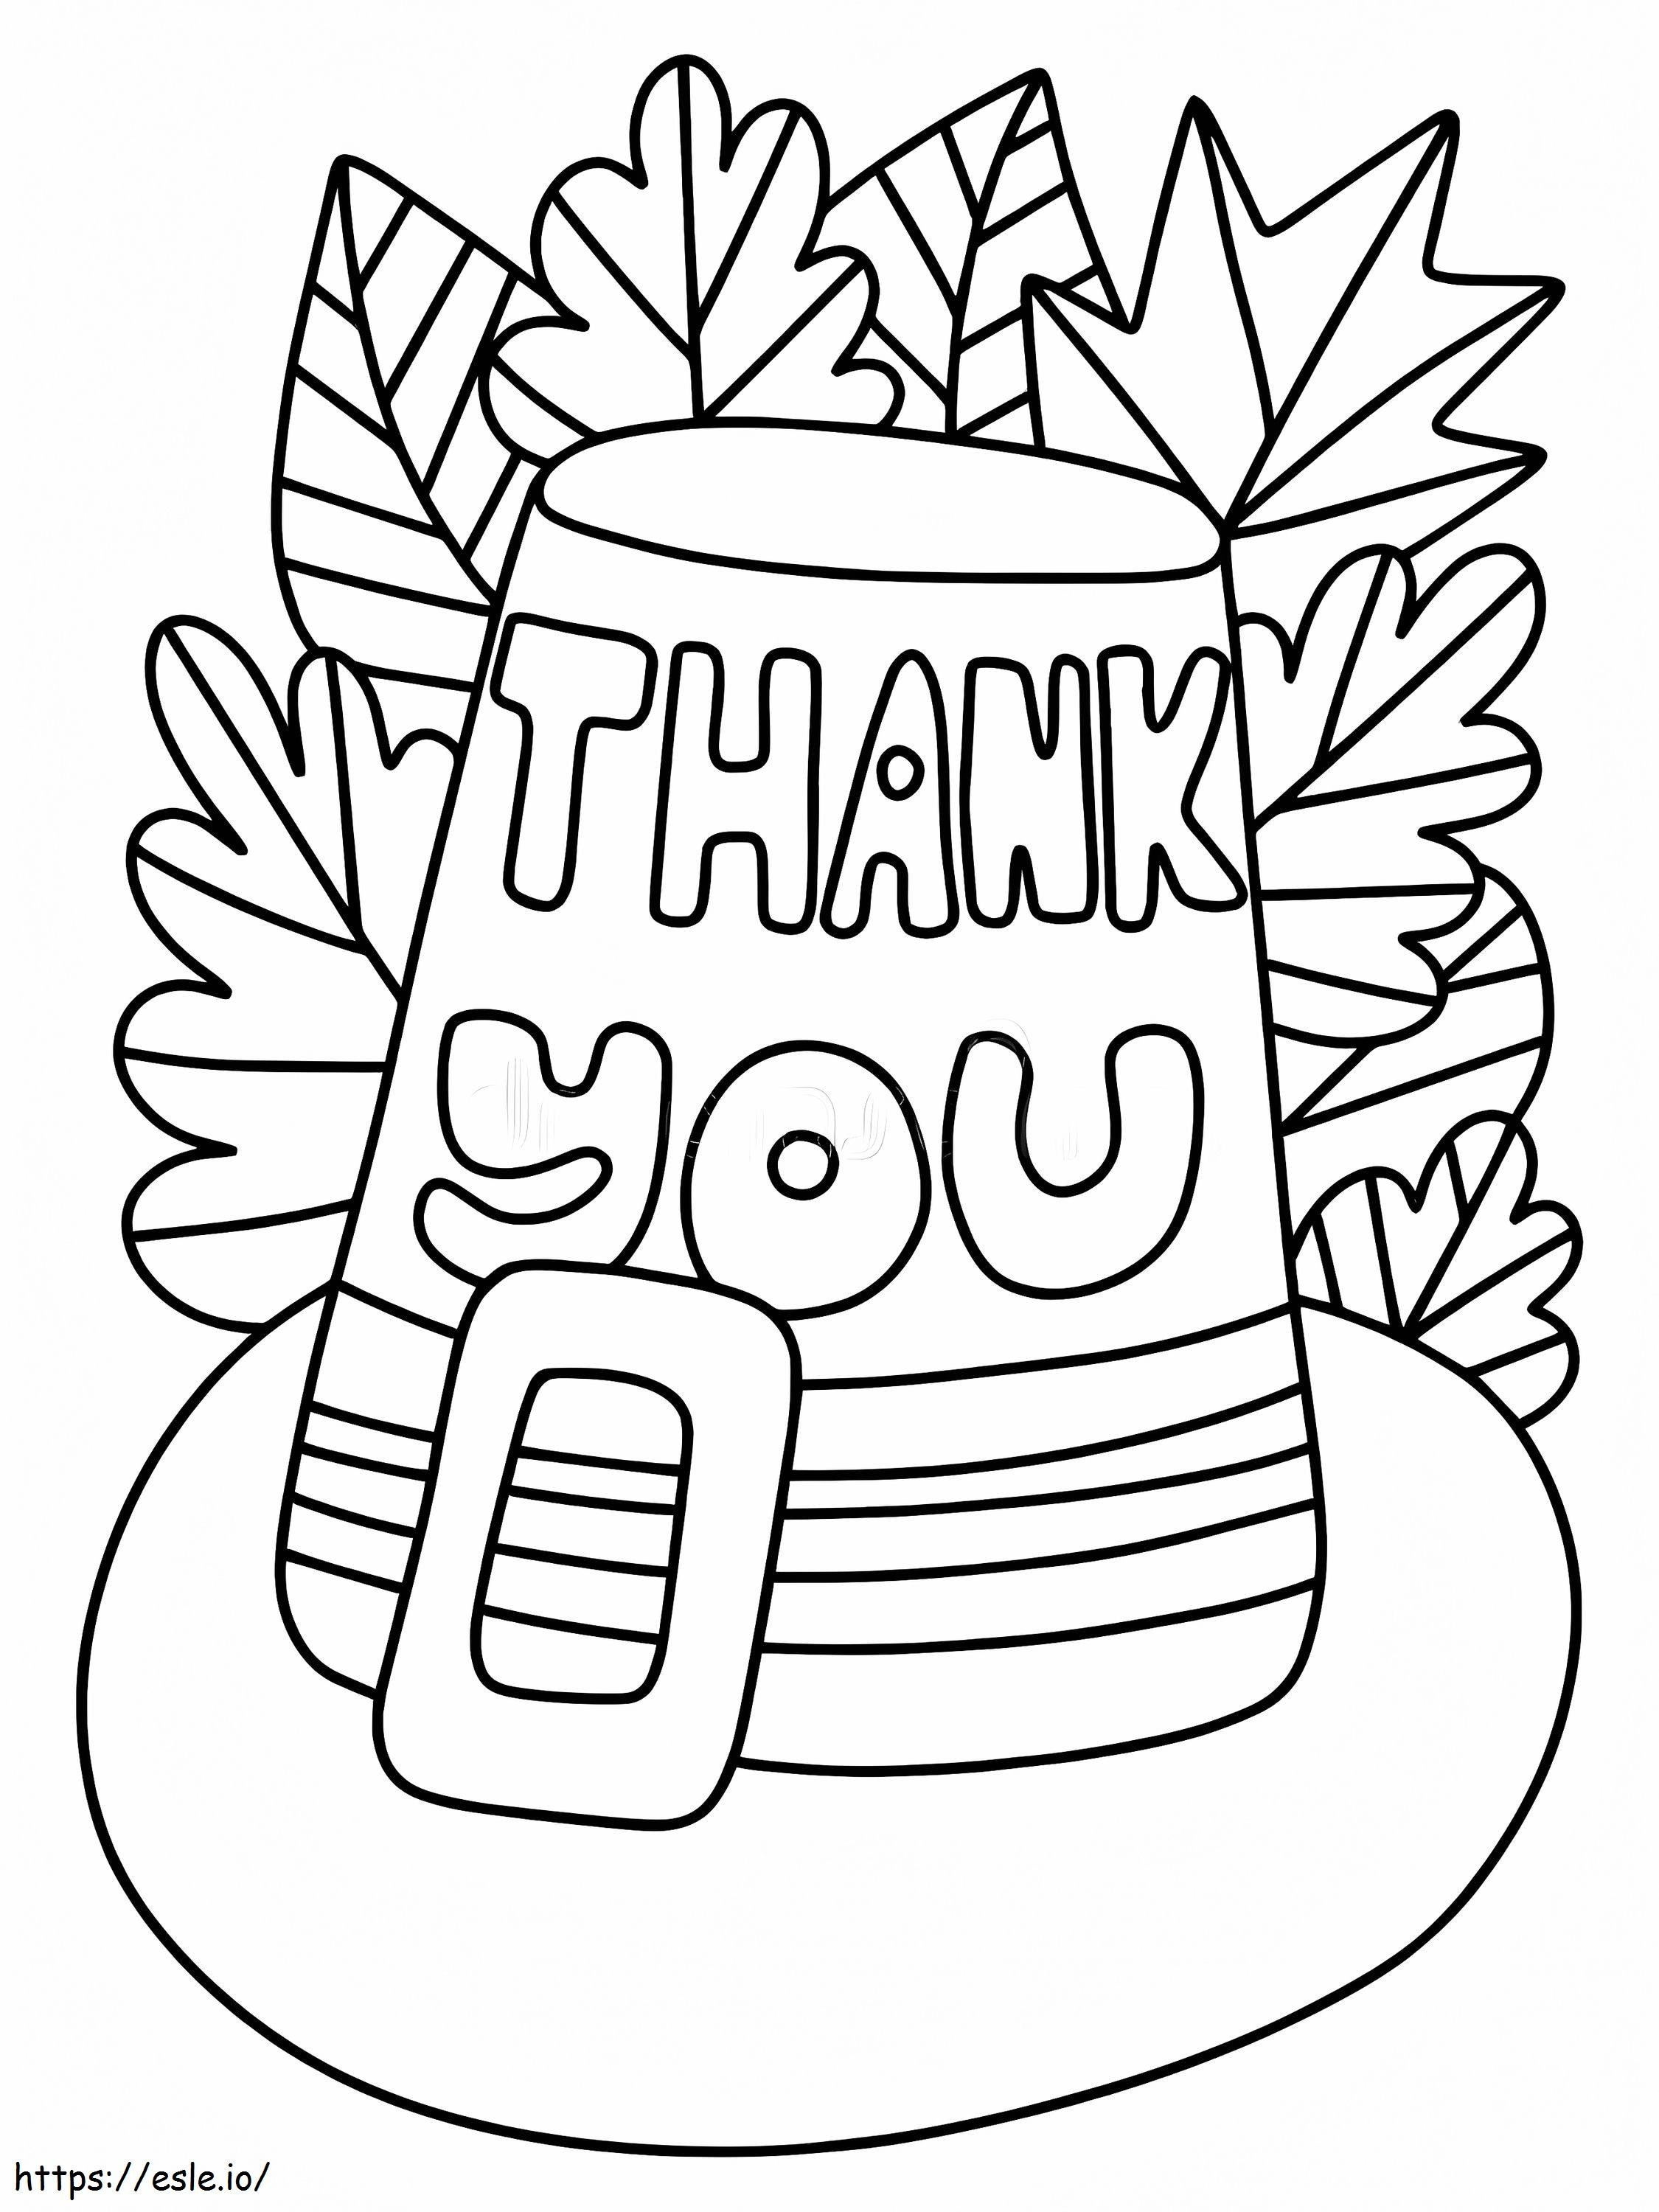 Great Thanks coloring page